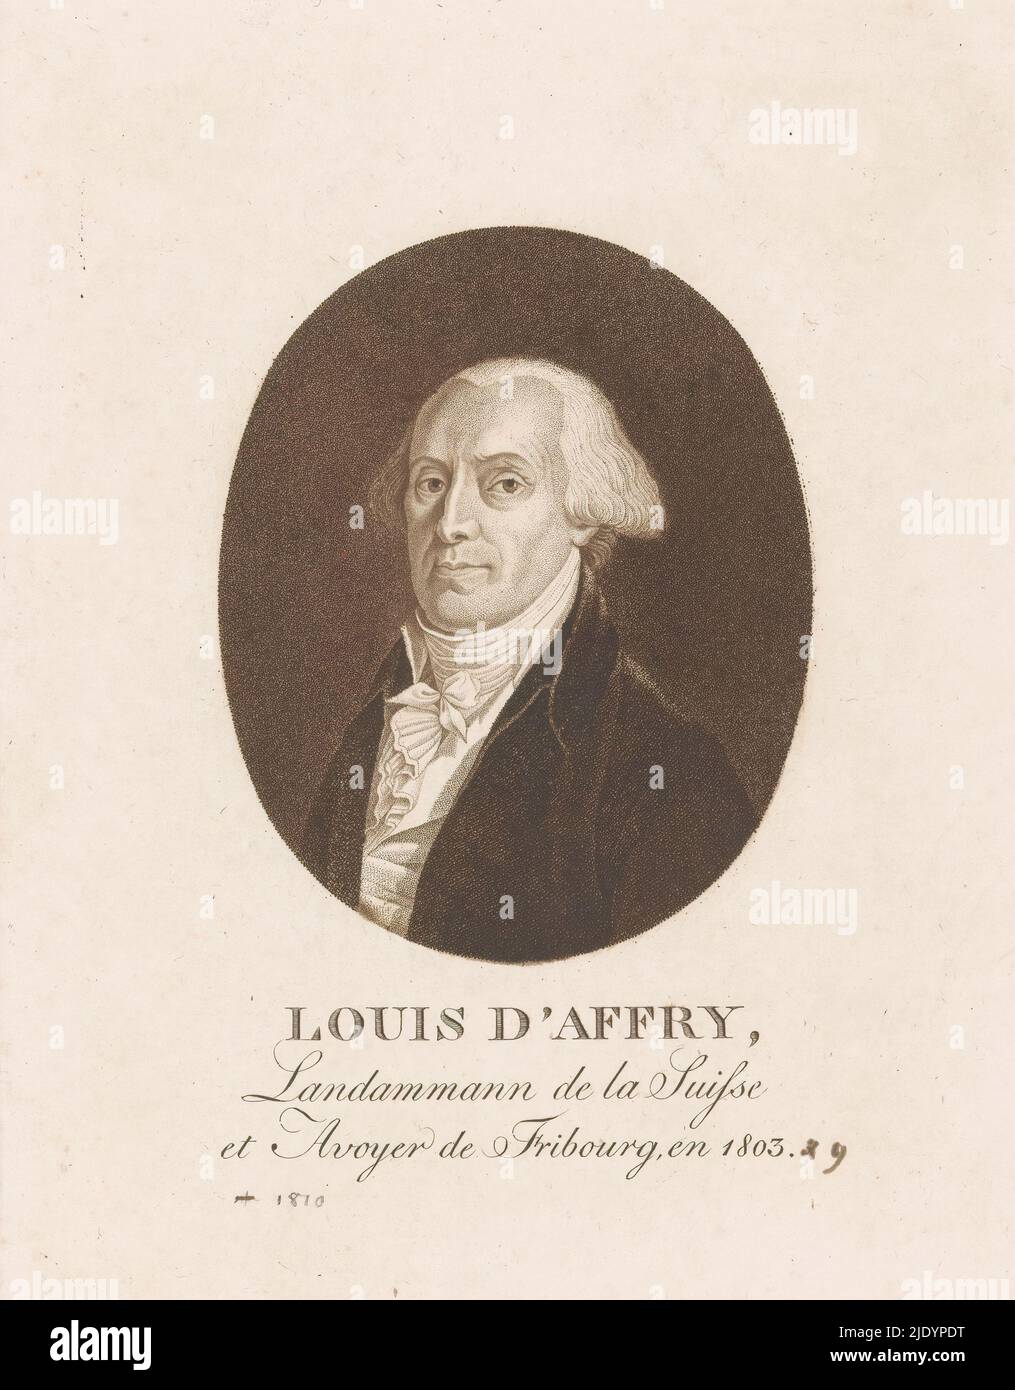 Portrait of Louis d' Affry, Portrait of Louis d' Affry in an oval frame. In the lower margin his name and two lines of French text., print maker: anonymous, 1803 - 1899, paper, height 218 mm × width 152 mm Stock Photo